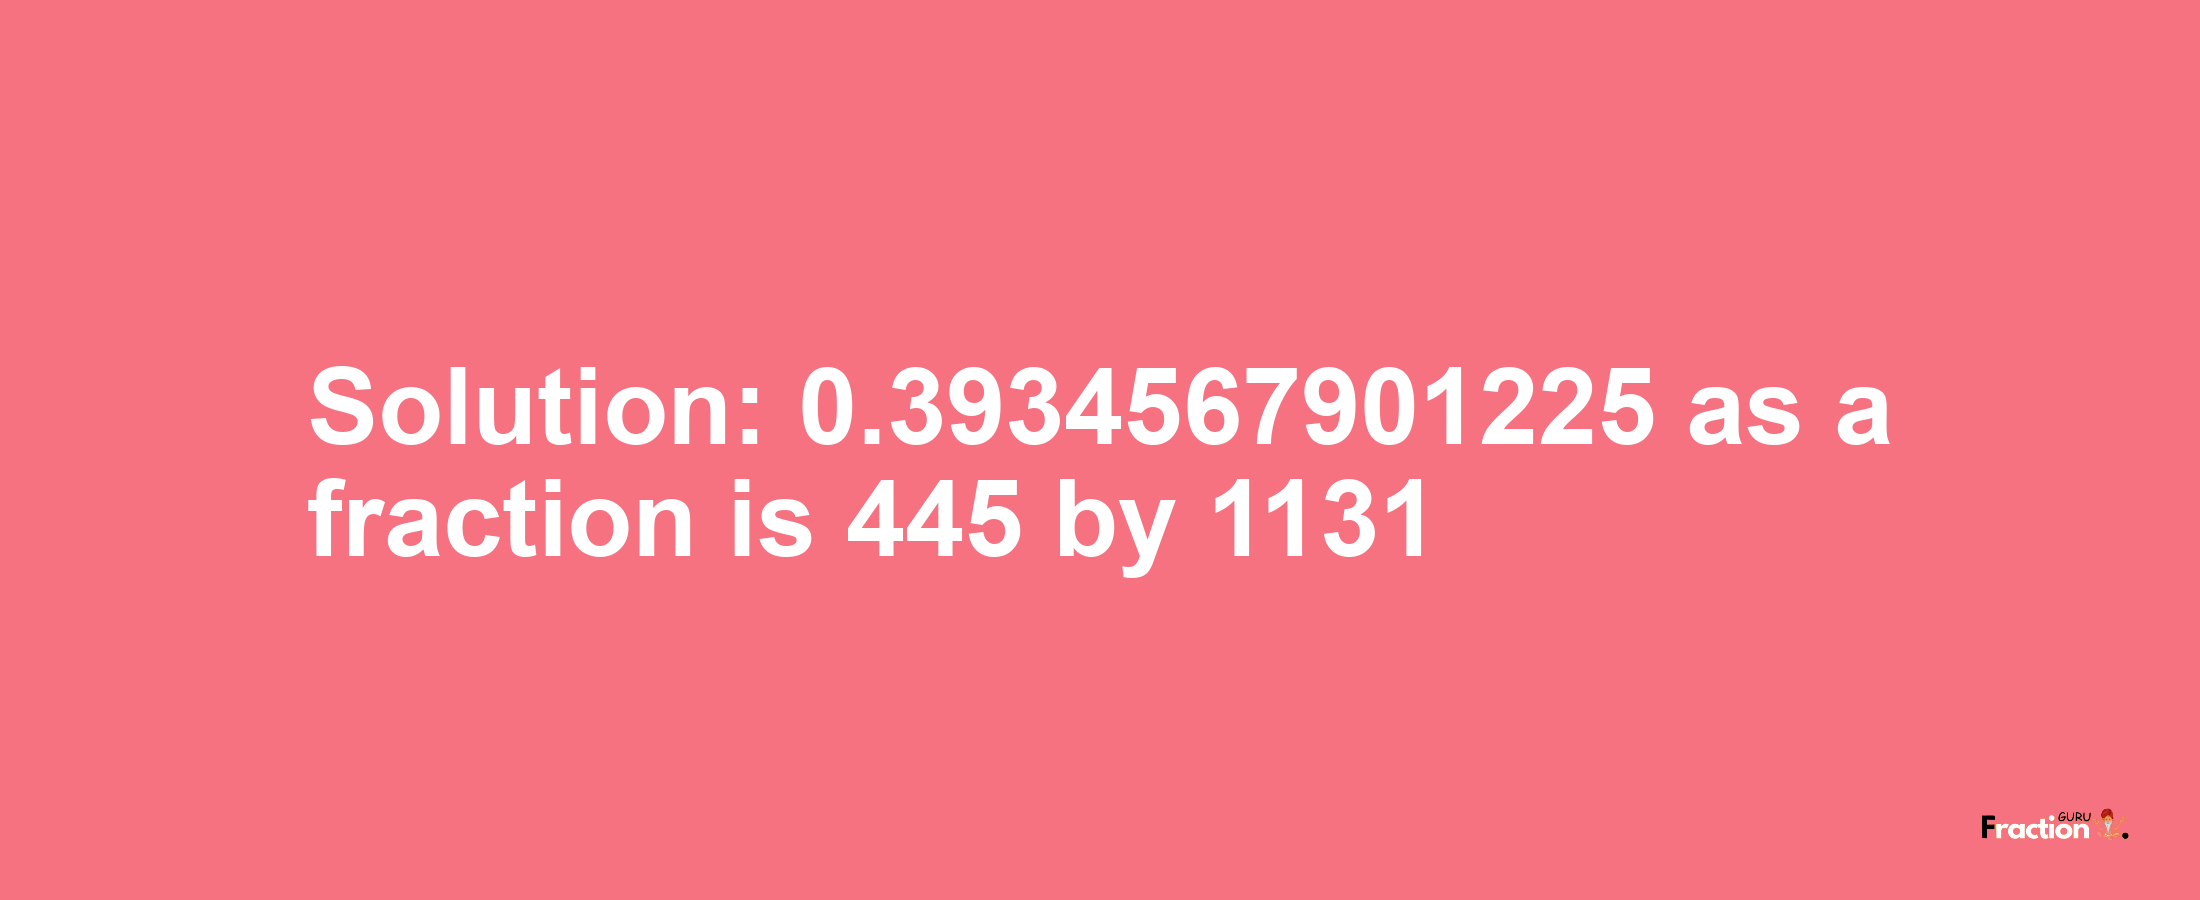 Solution:0.3934567901225 as a fraction is 445/1131